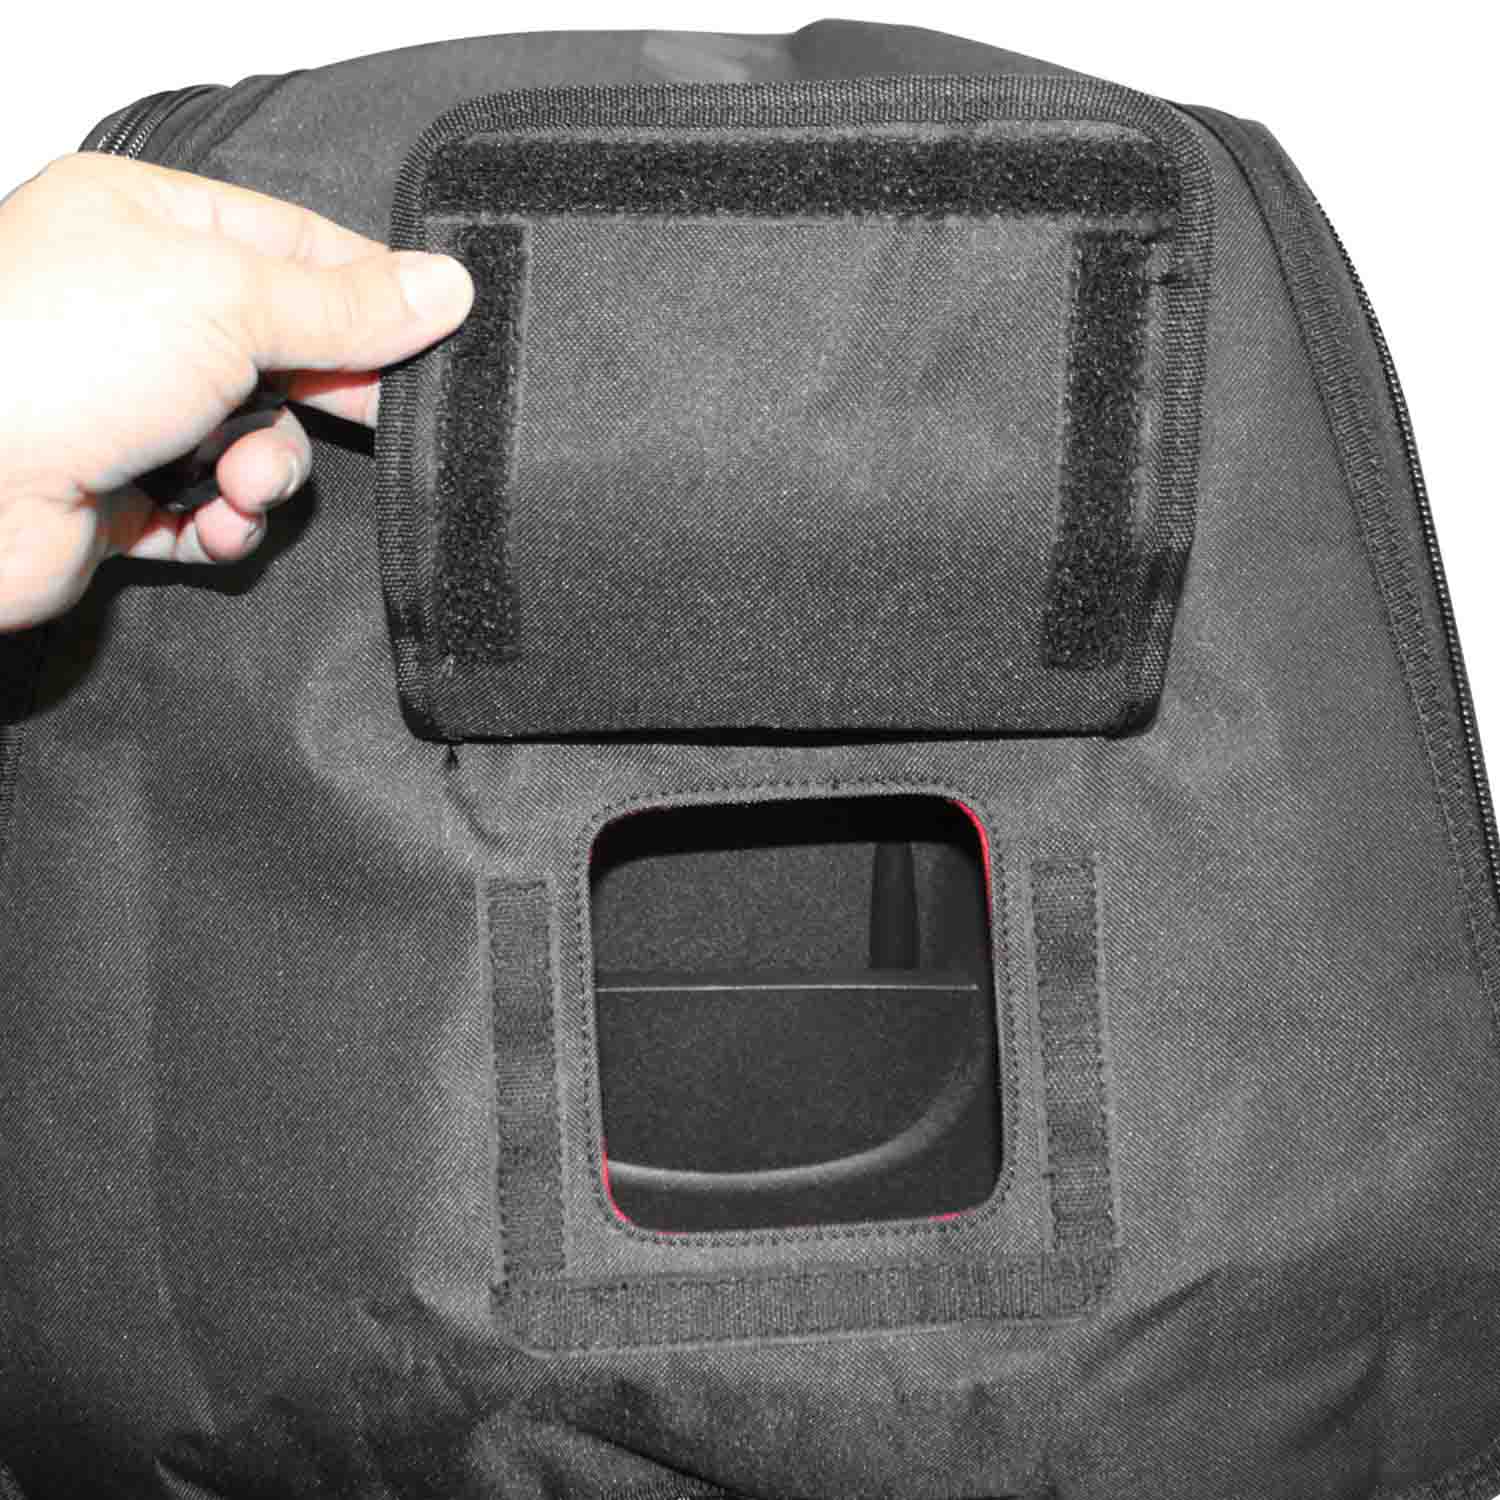 Odyssey BRLSPKLG Large Size Carrying Bag for 15 Inches Molded Speakers - Hollywood DJ